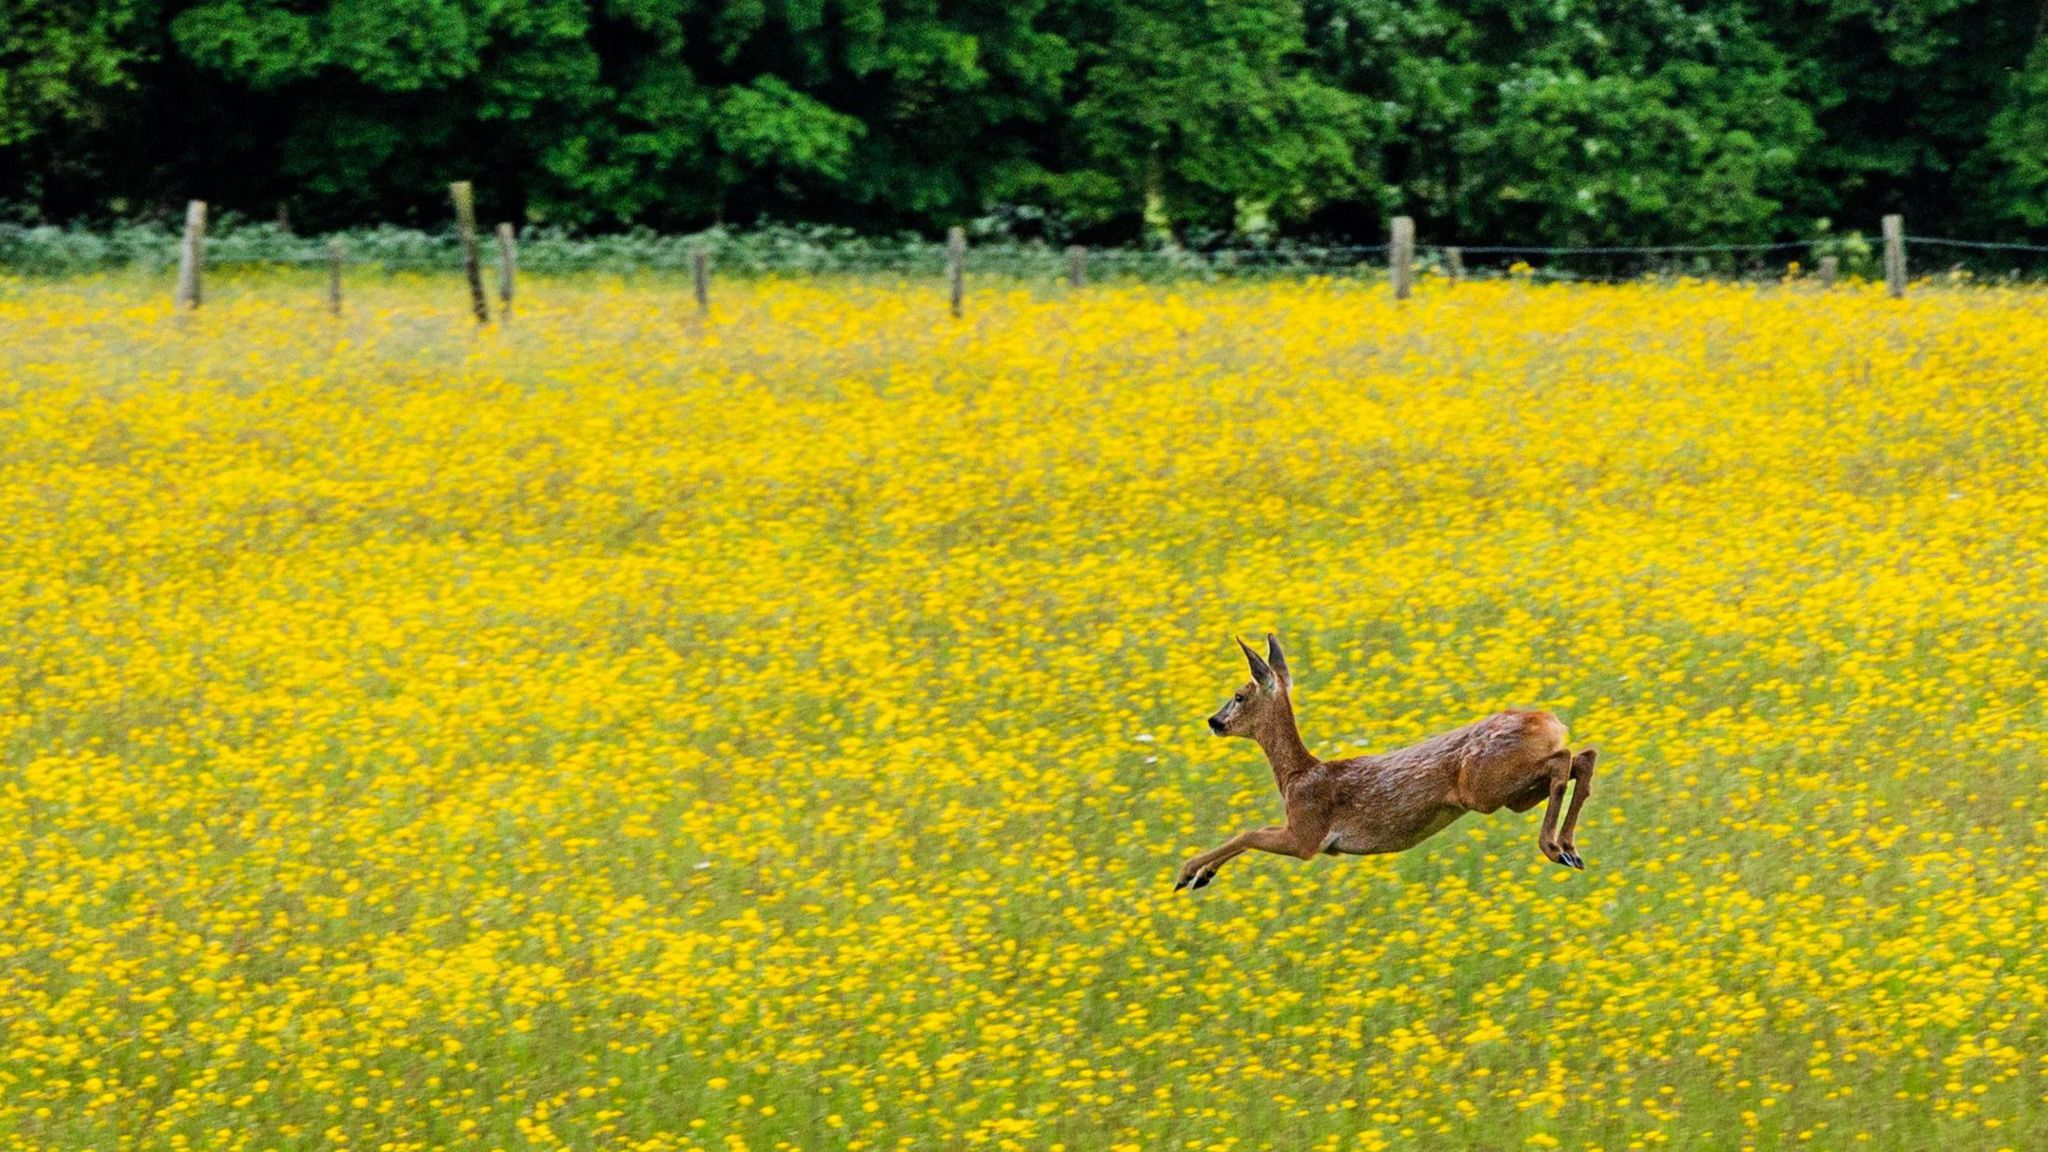 MONDAY - A deer, mid-air, over a field of yellow flowers at Kintbury